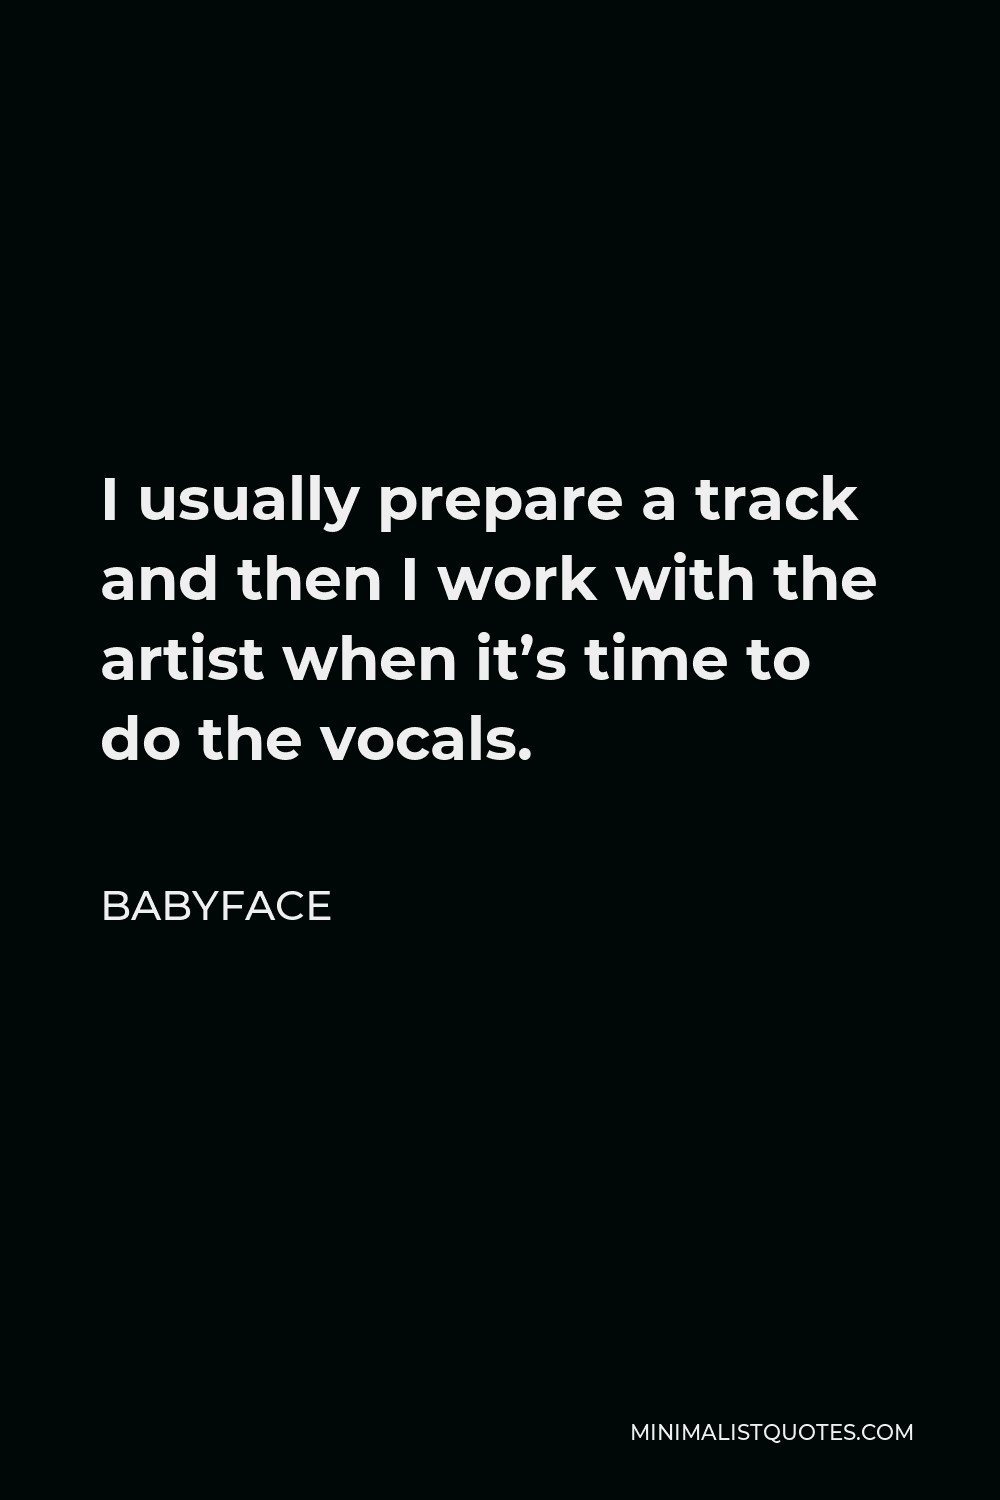 Babyface Quote - I usually prepare a track and then I work with the artist when it’s time to do the vocals.